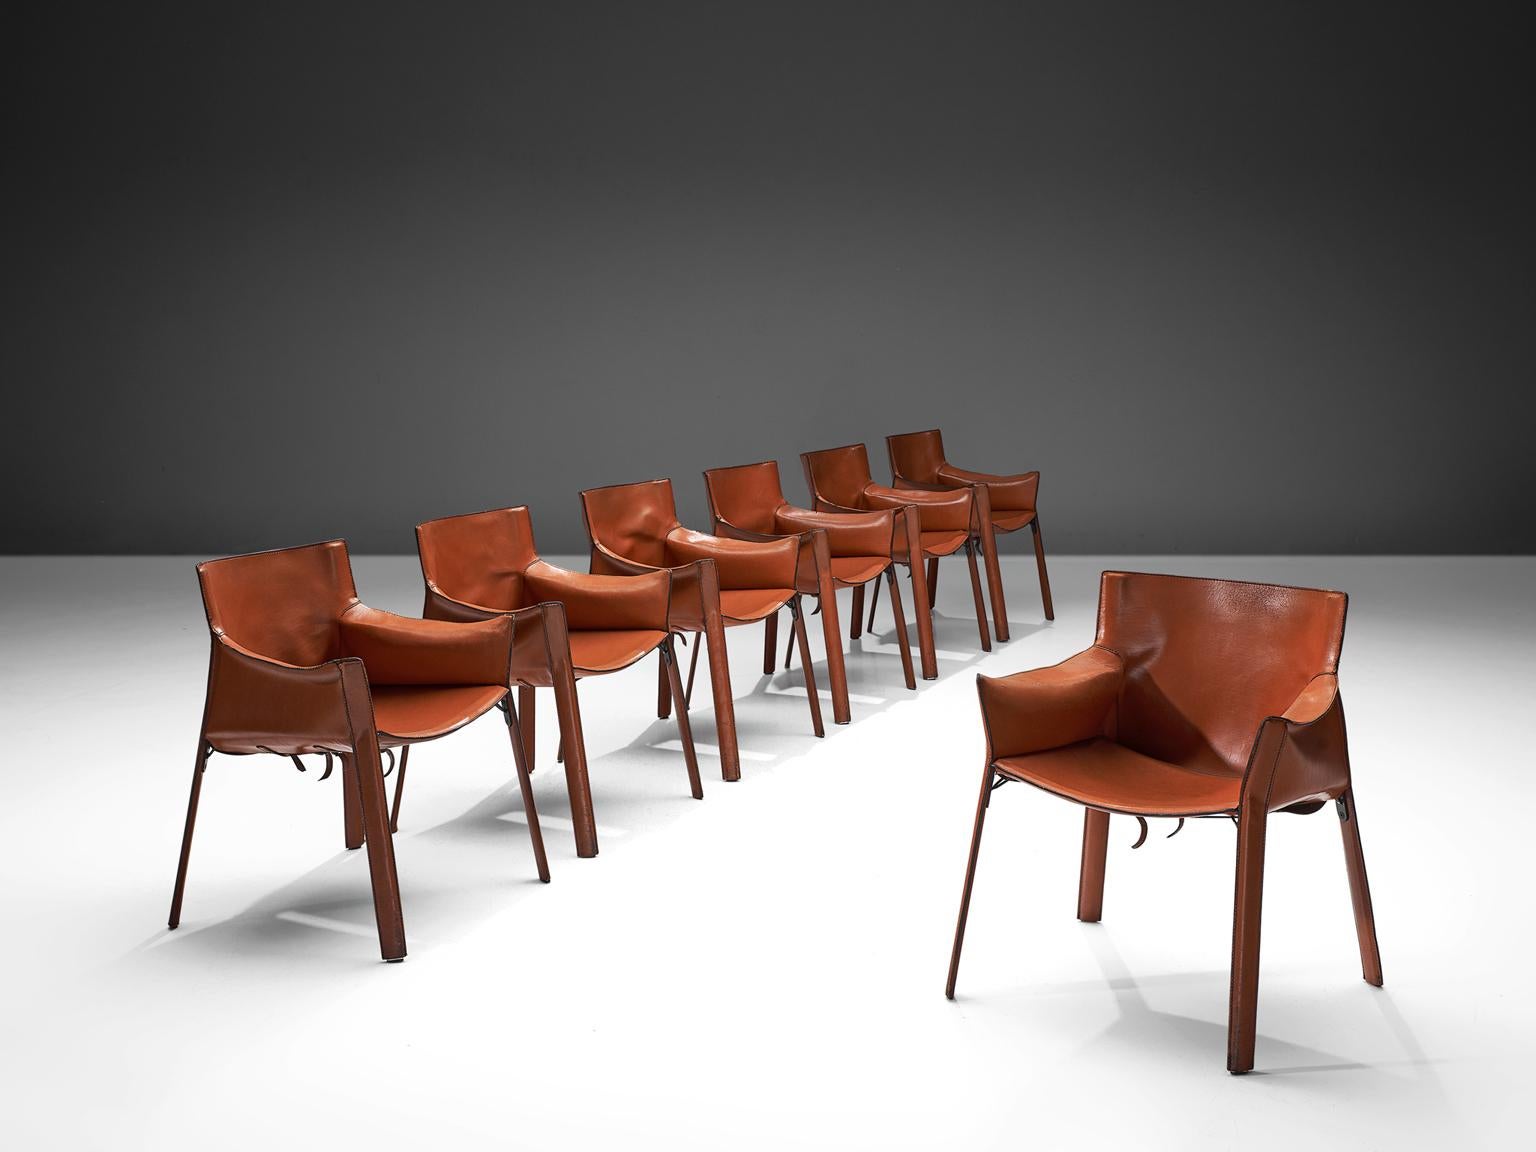 Giancarlo Vegni for Fasem, set of seven P90 chairs, terracotta leather and metal, Italy, 1970s.

These armchairs feature two synthetic resin ferrules at the tip of the uprights of the back, minimal padding, which supports the lower back an a